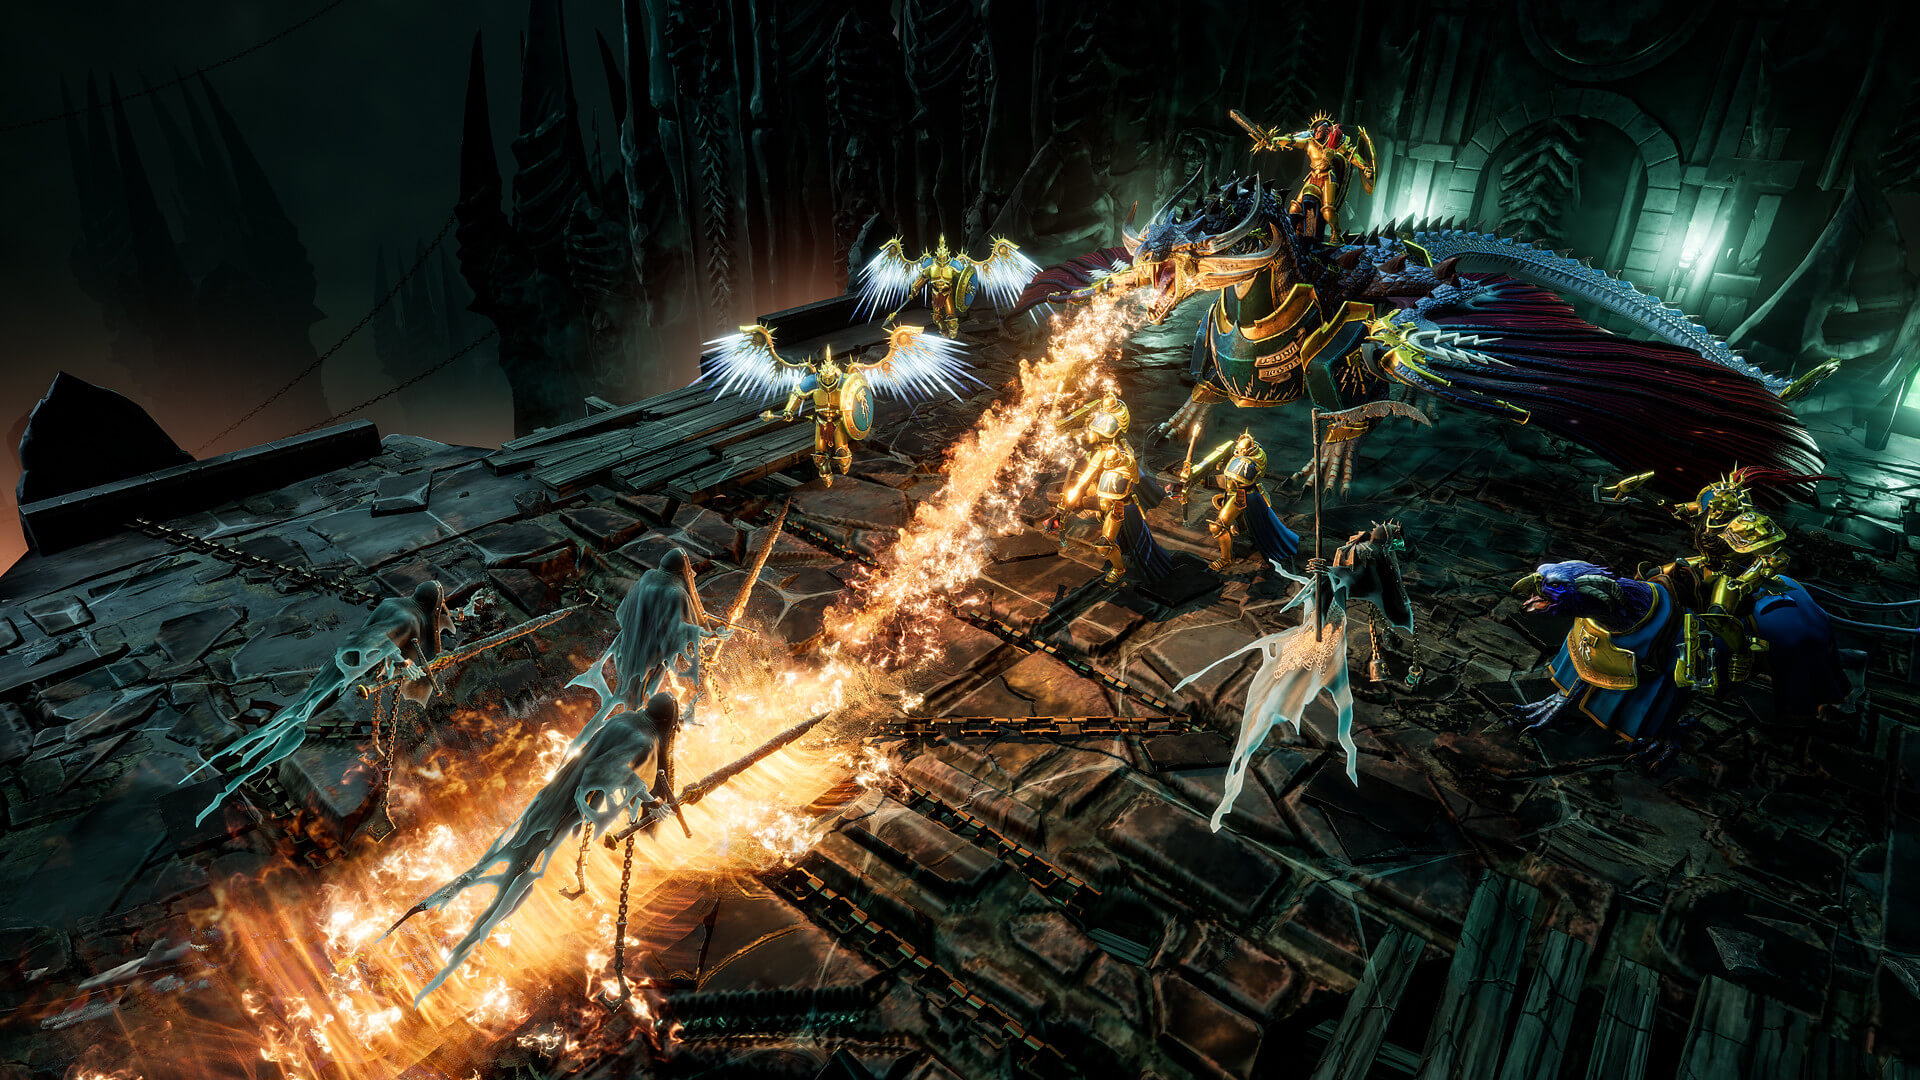 Warhammer Age of Sigmar: Storm Ground is a skirmish turn-based strategy